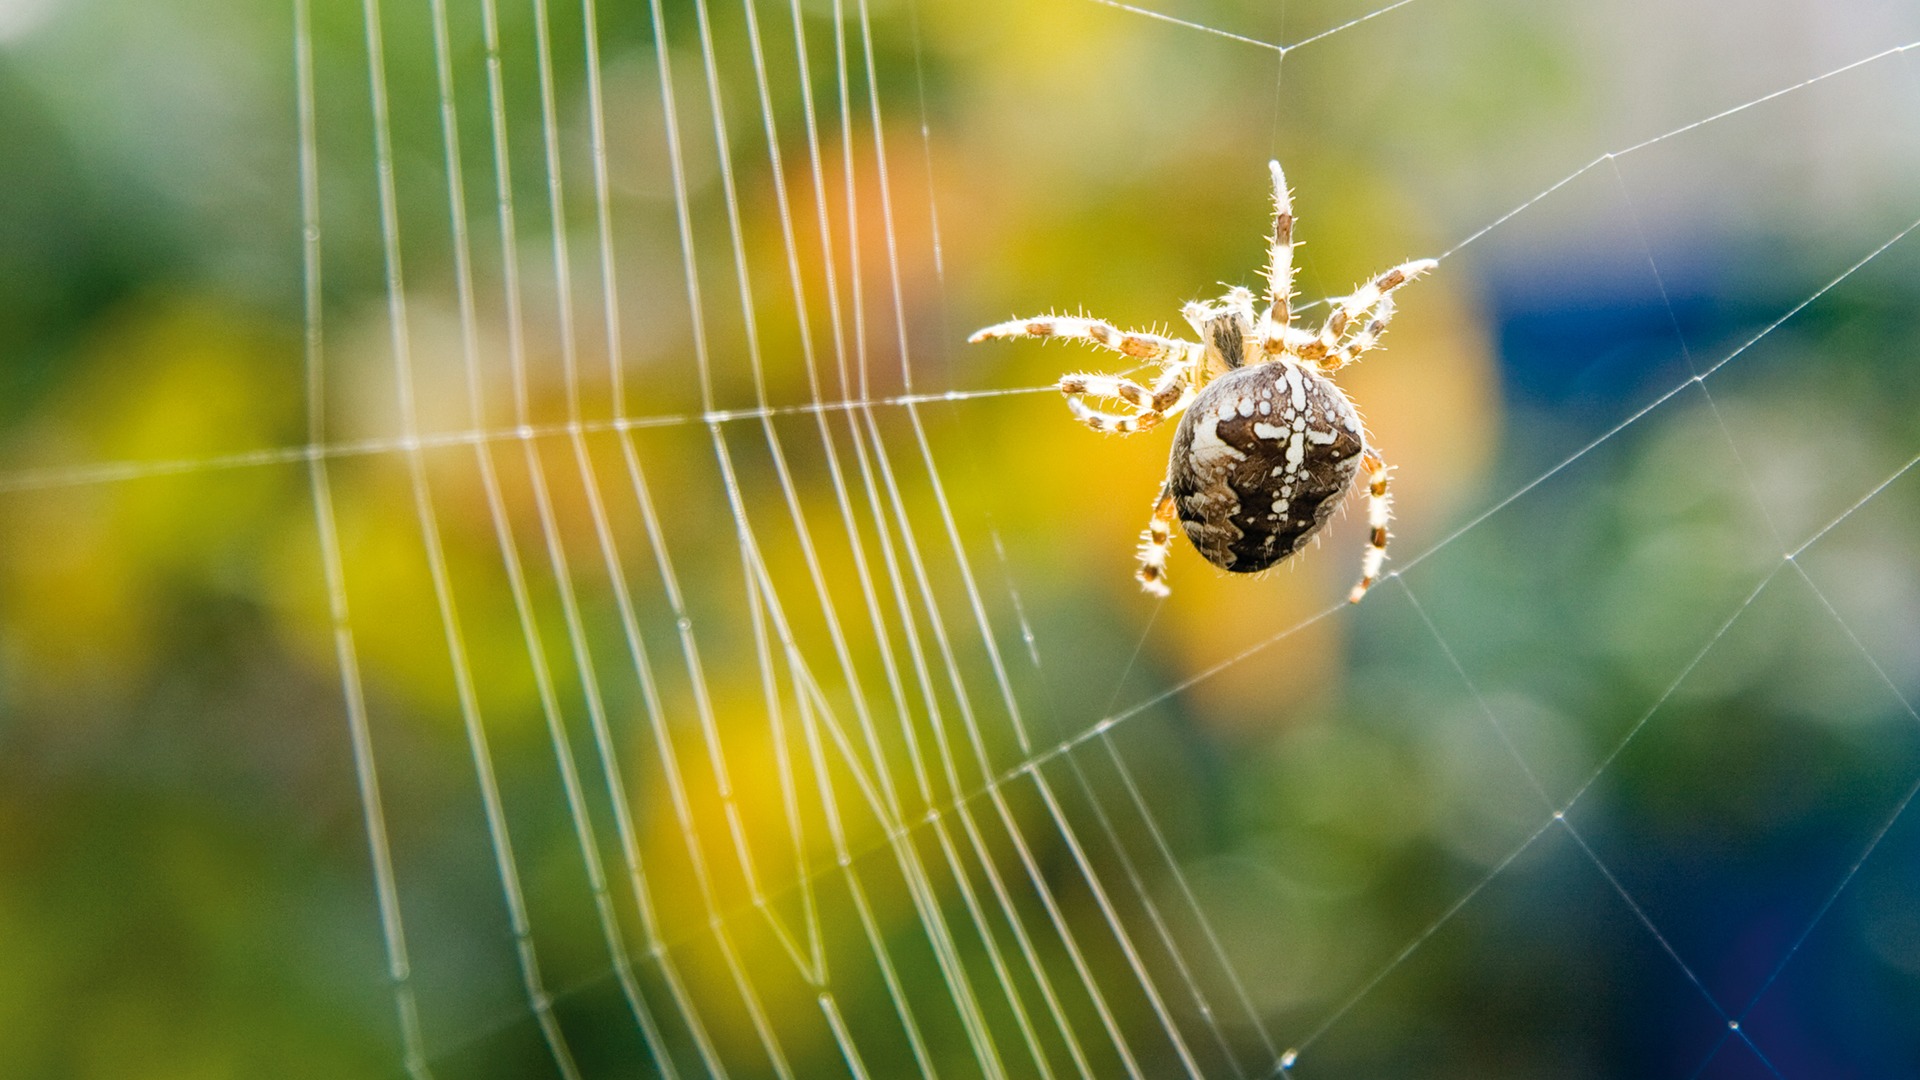 Close up detail of a European garden spider spinning a web, taken on September 14, 2008. (Photo by Chris George/Digital Camera Magazine/Future via Getty Images)